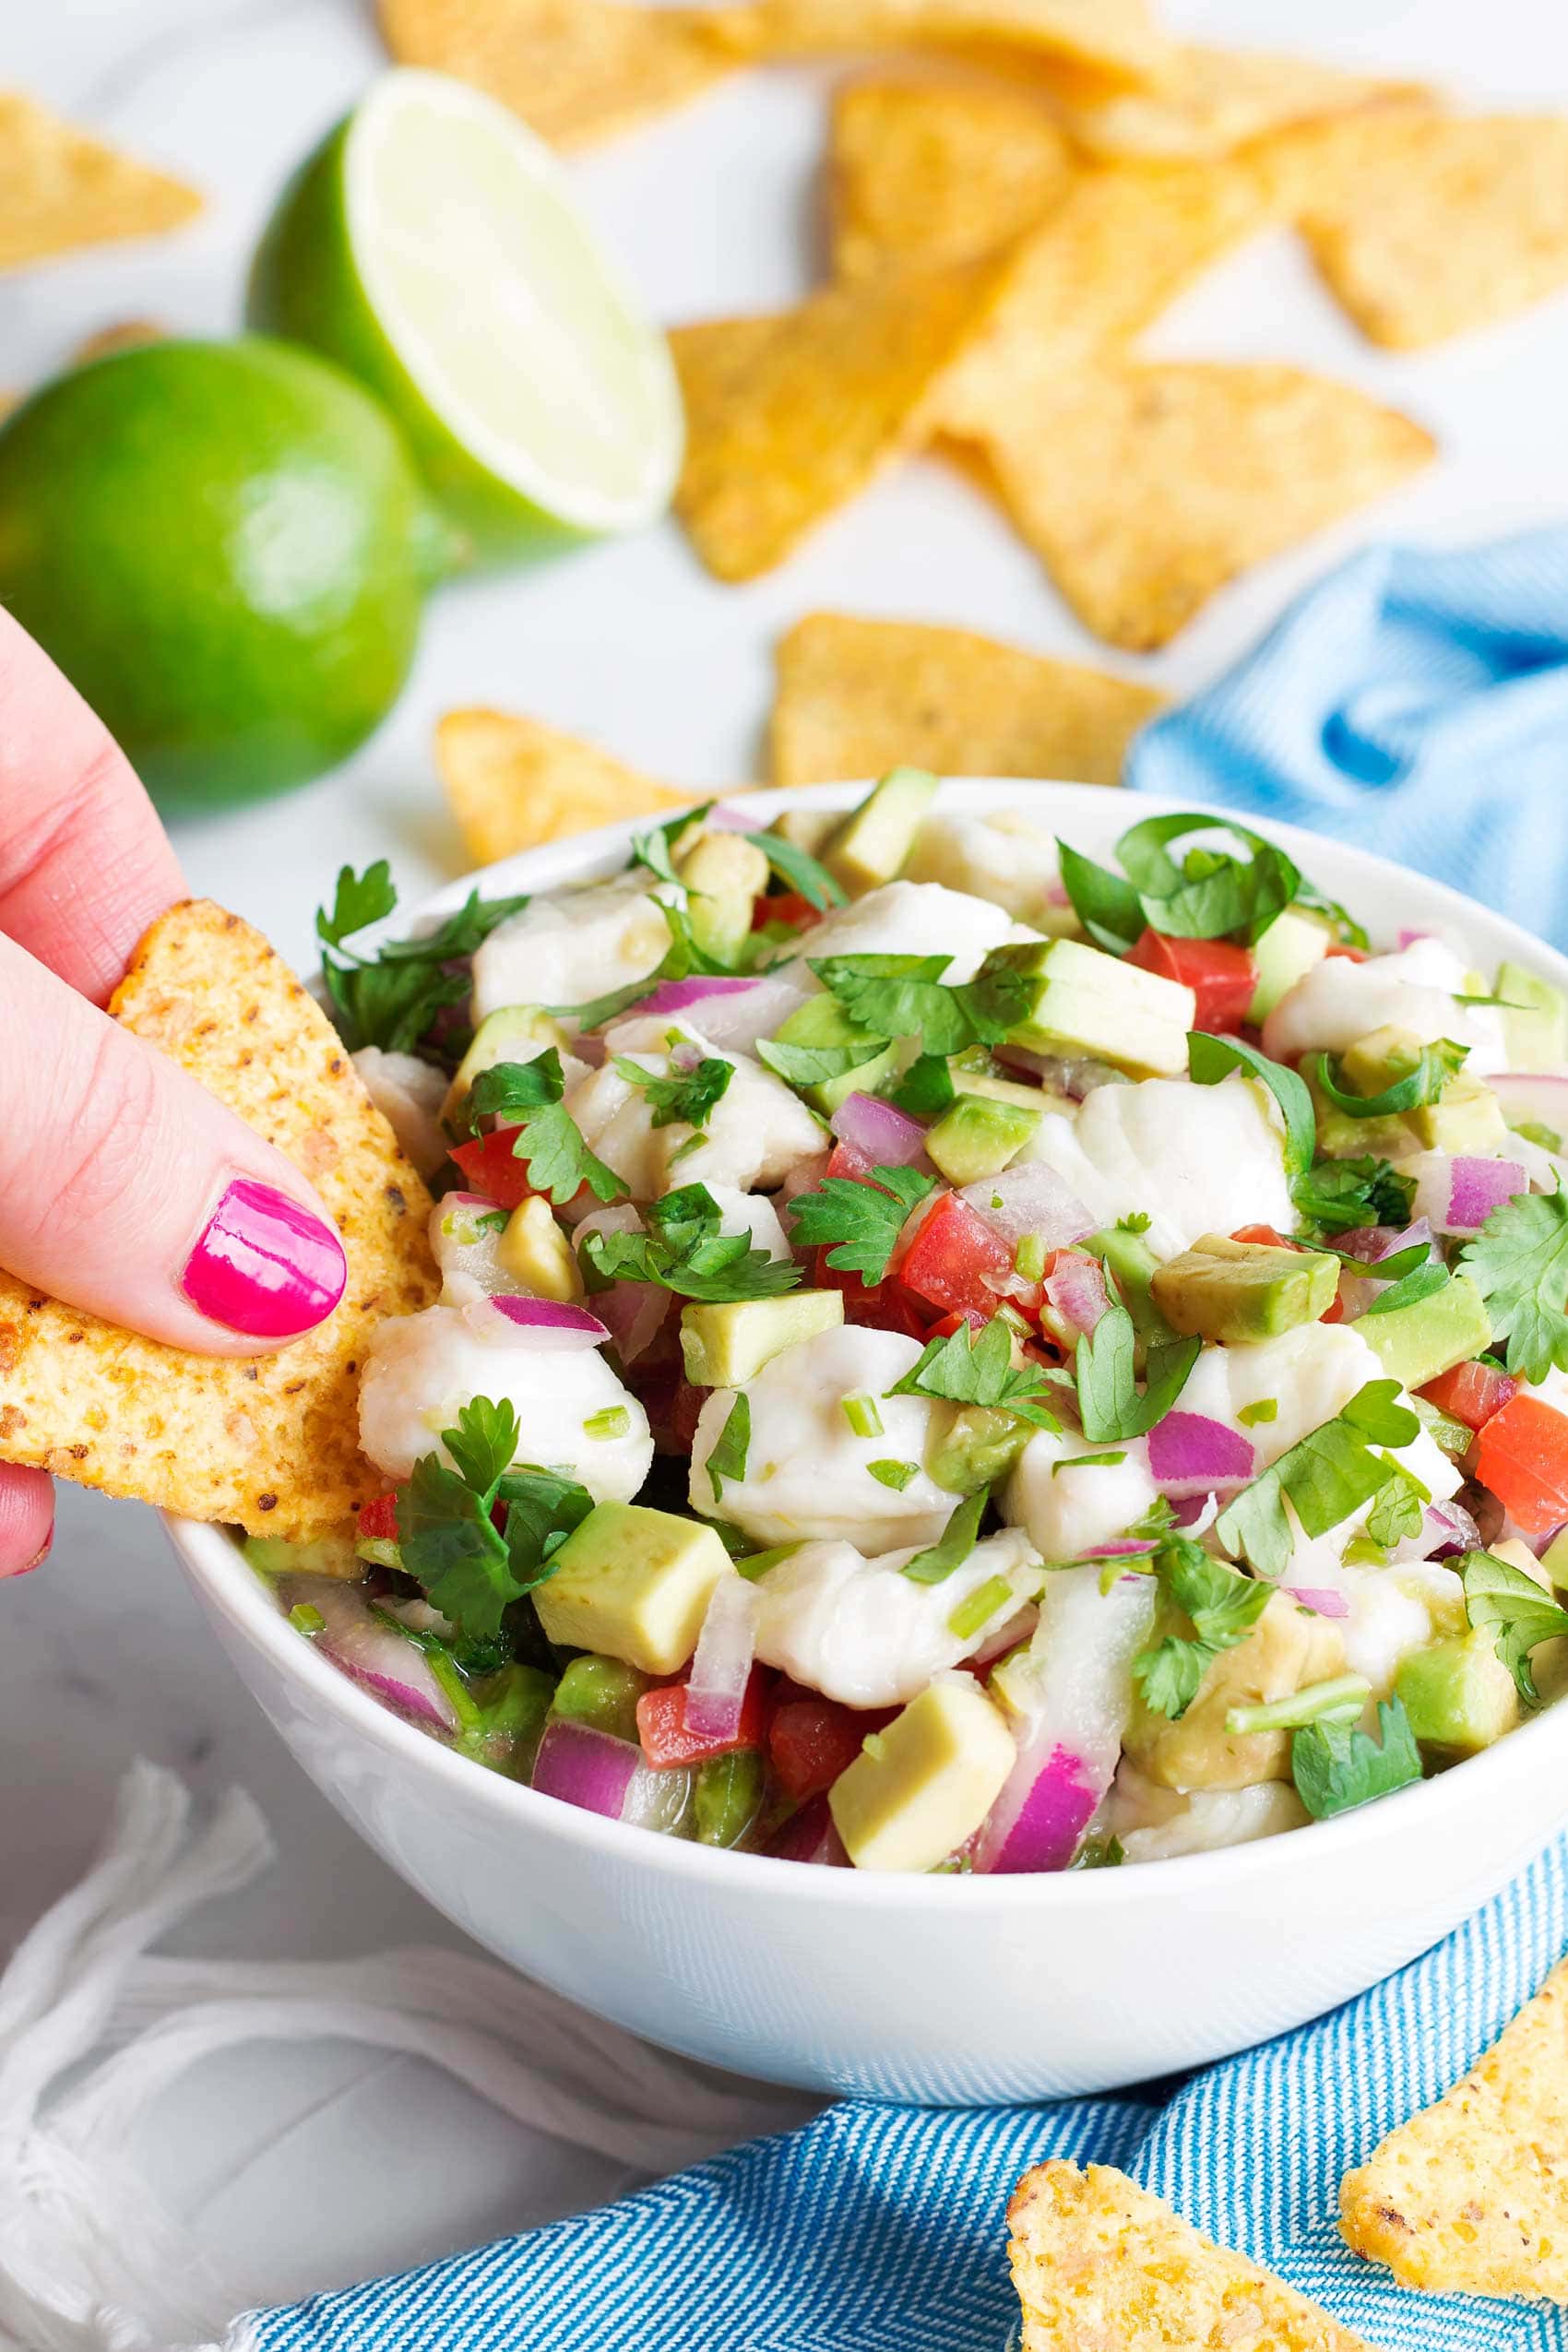 how to make ceviche, tortilla chip dipping into bowl of fresh ceviche